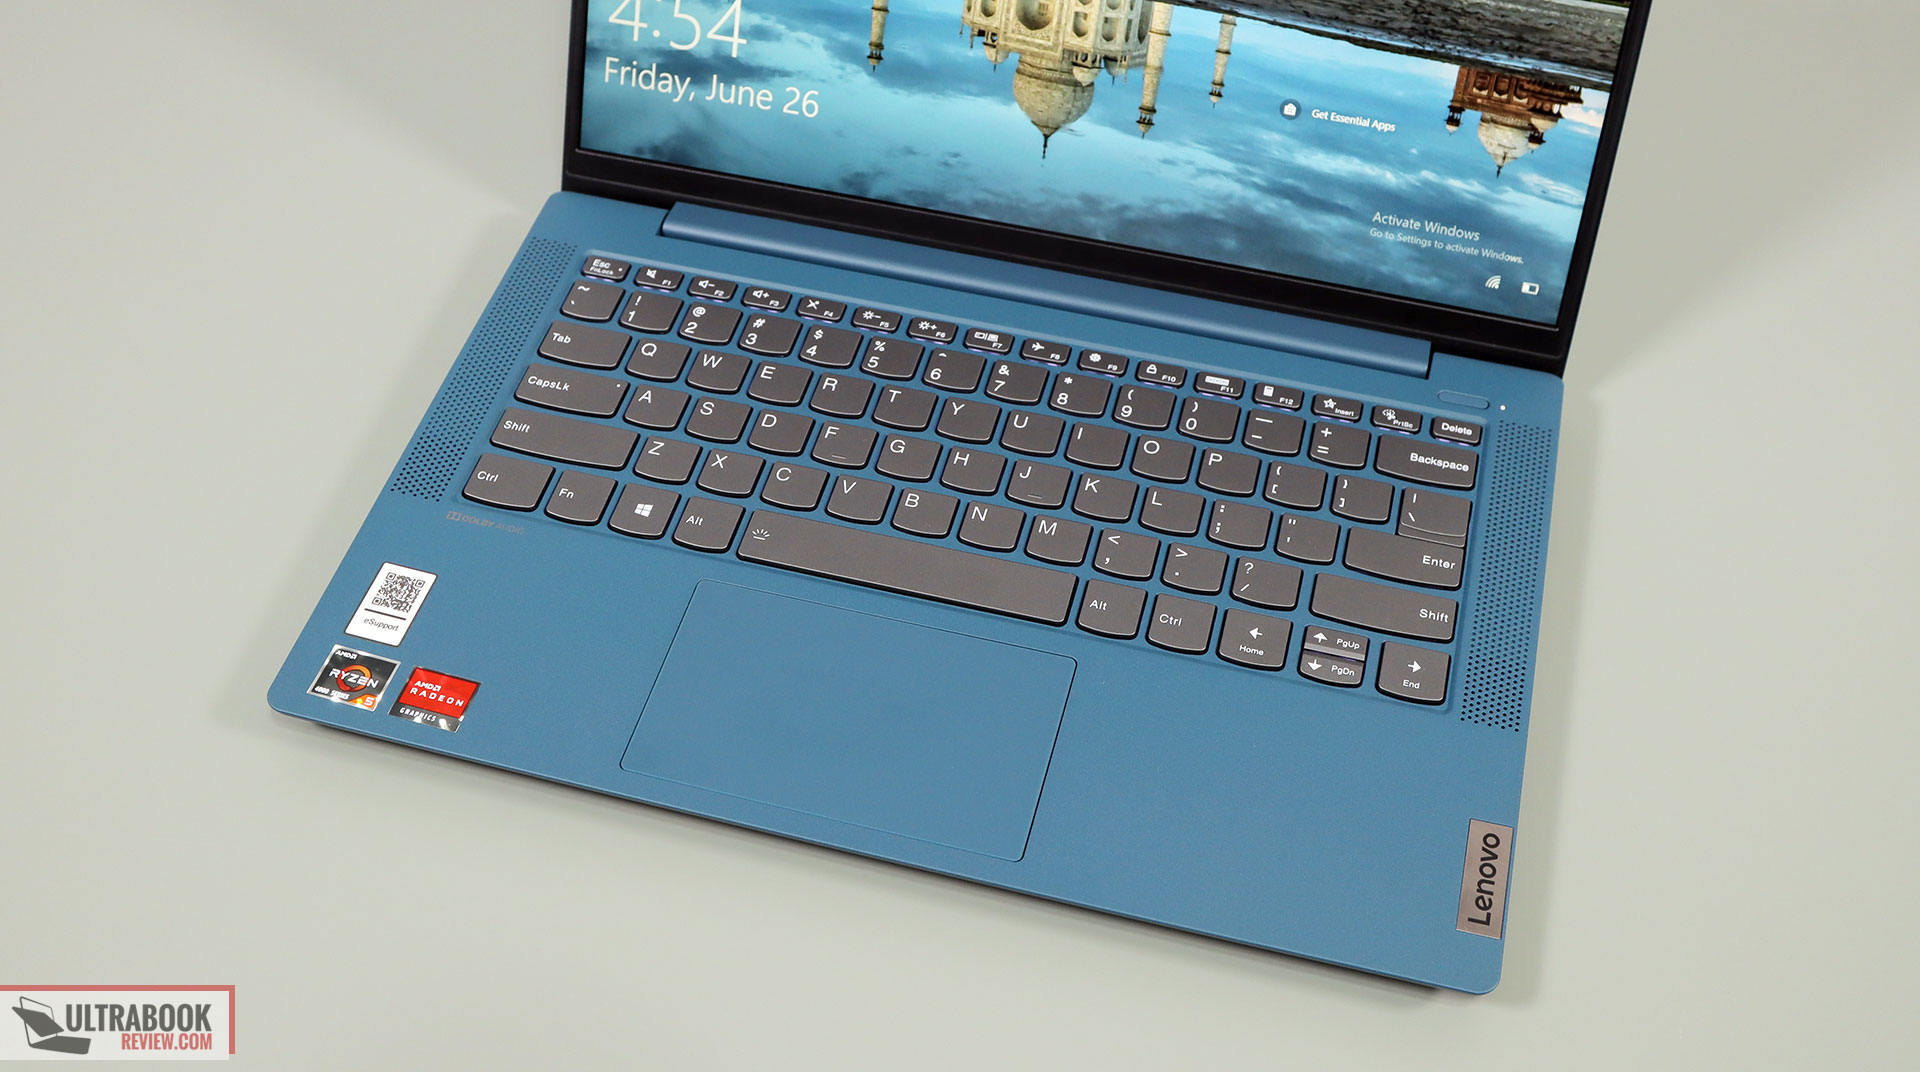 Lenovo ideapad 5 14are05 review (amd rzyen 5) - the almost perfect budget notebook